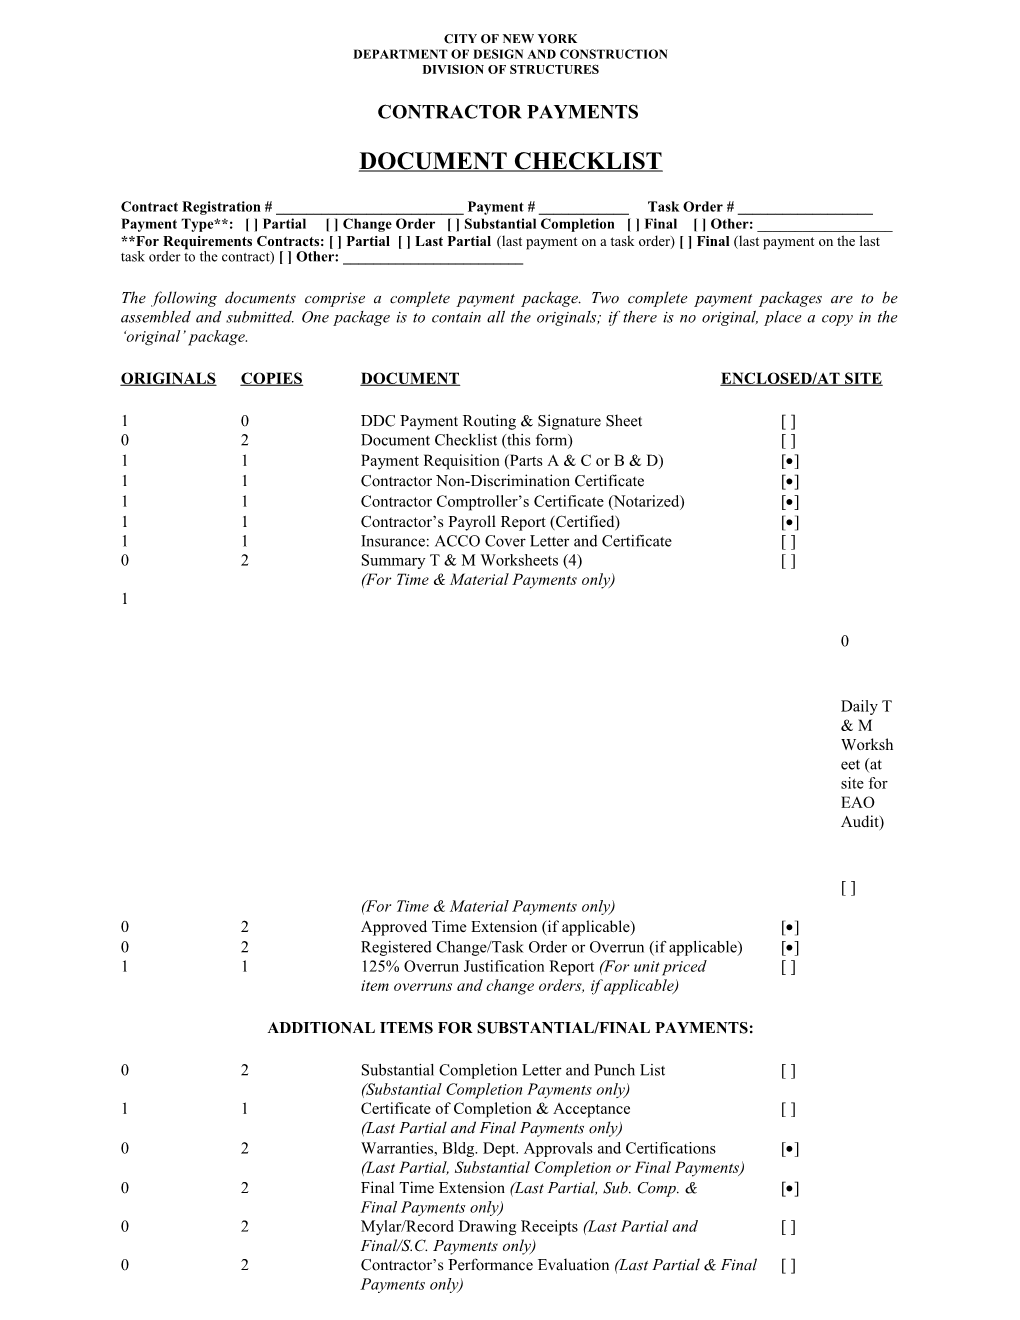 Document Checklist Division of Structures (2 Pages)